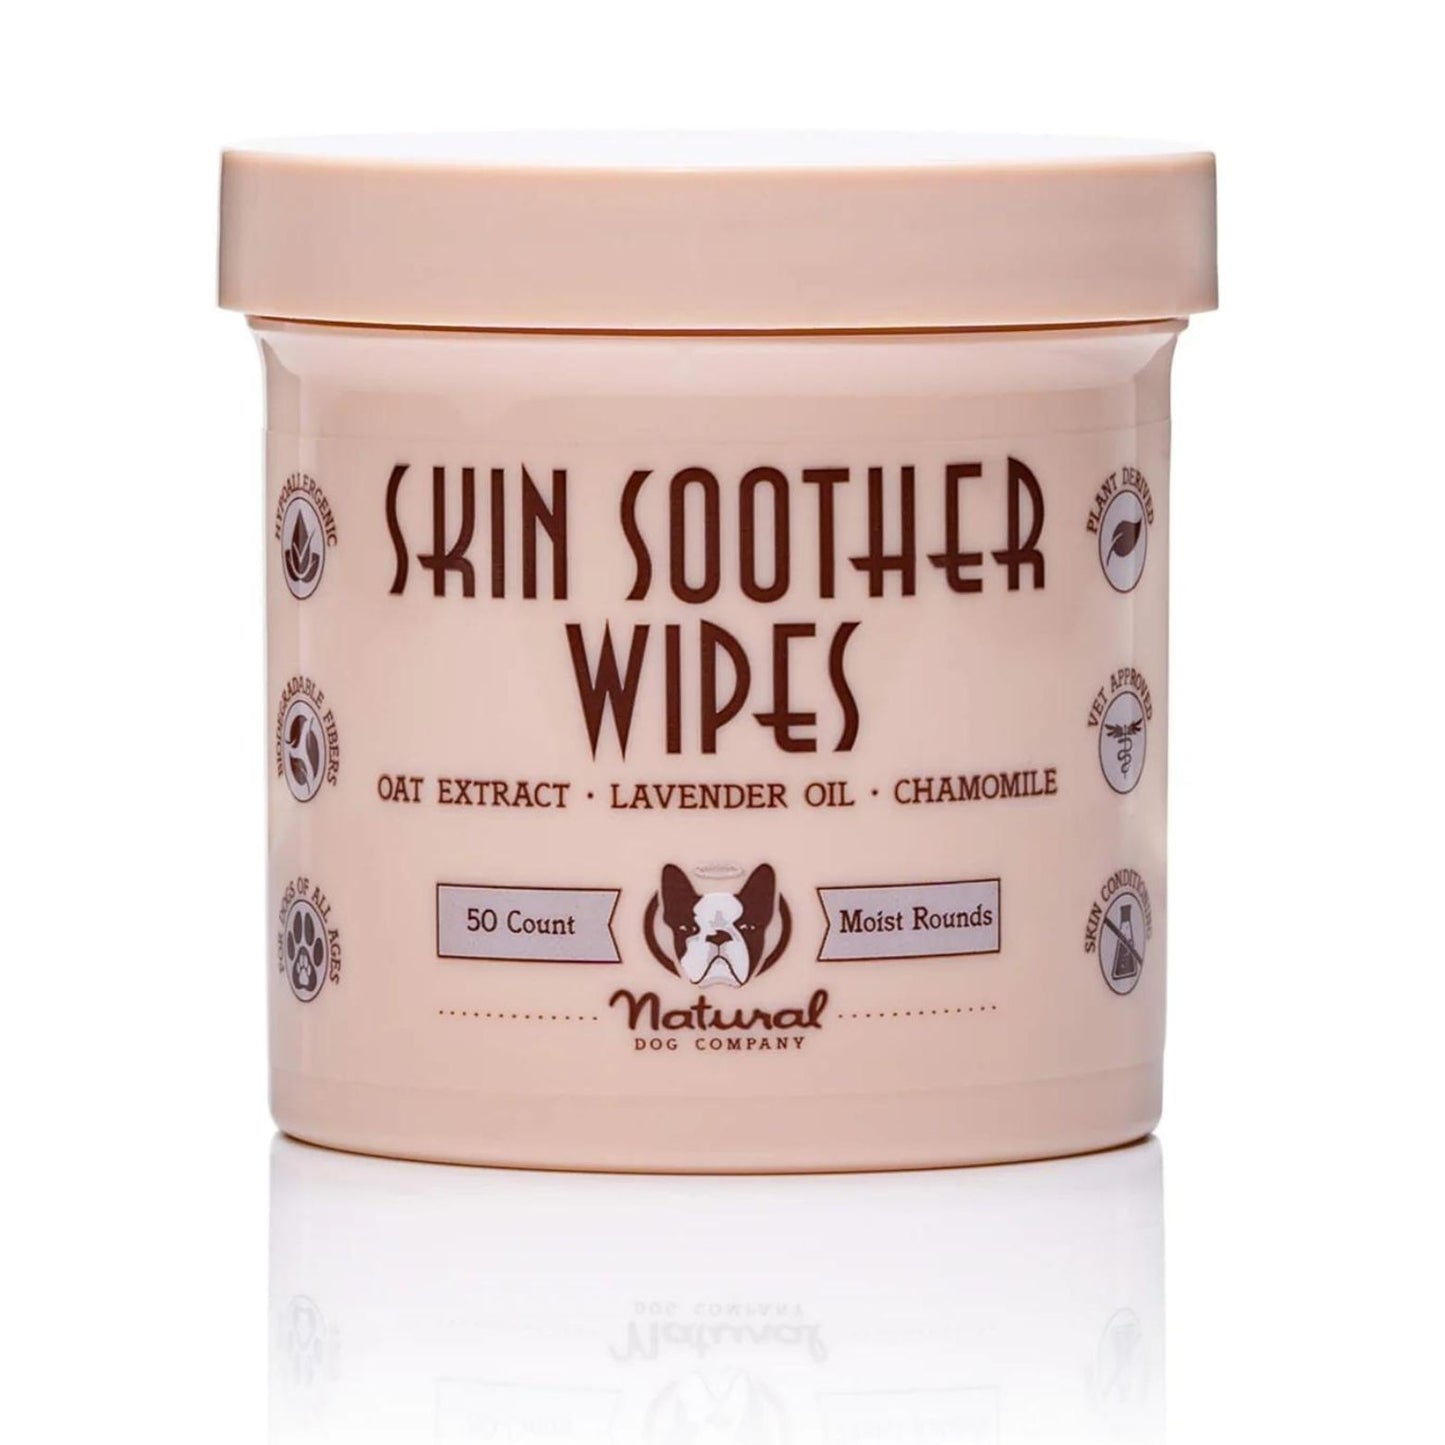 Natural Dog Skin Soother Wipes